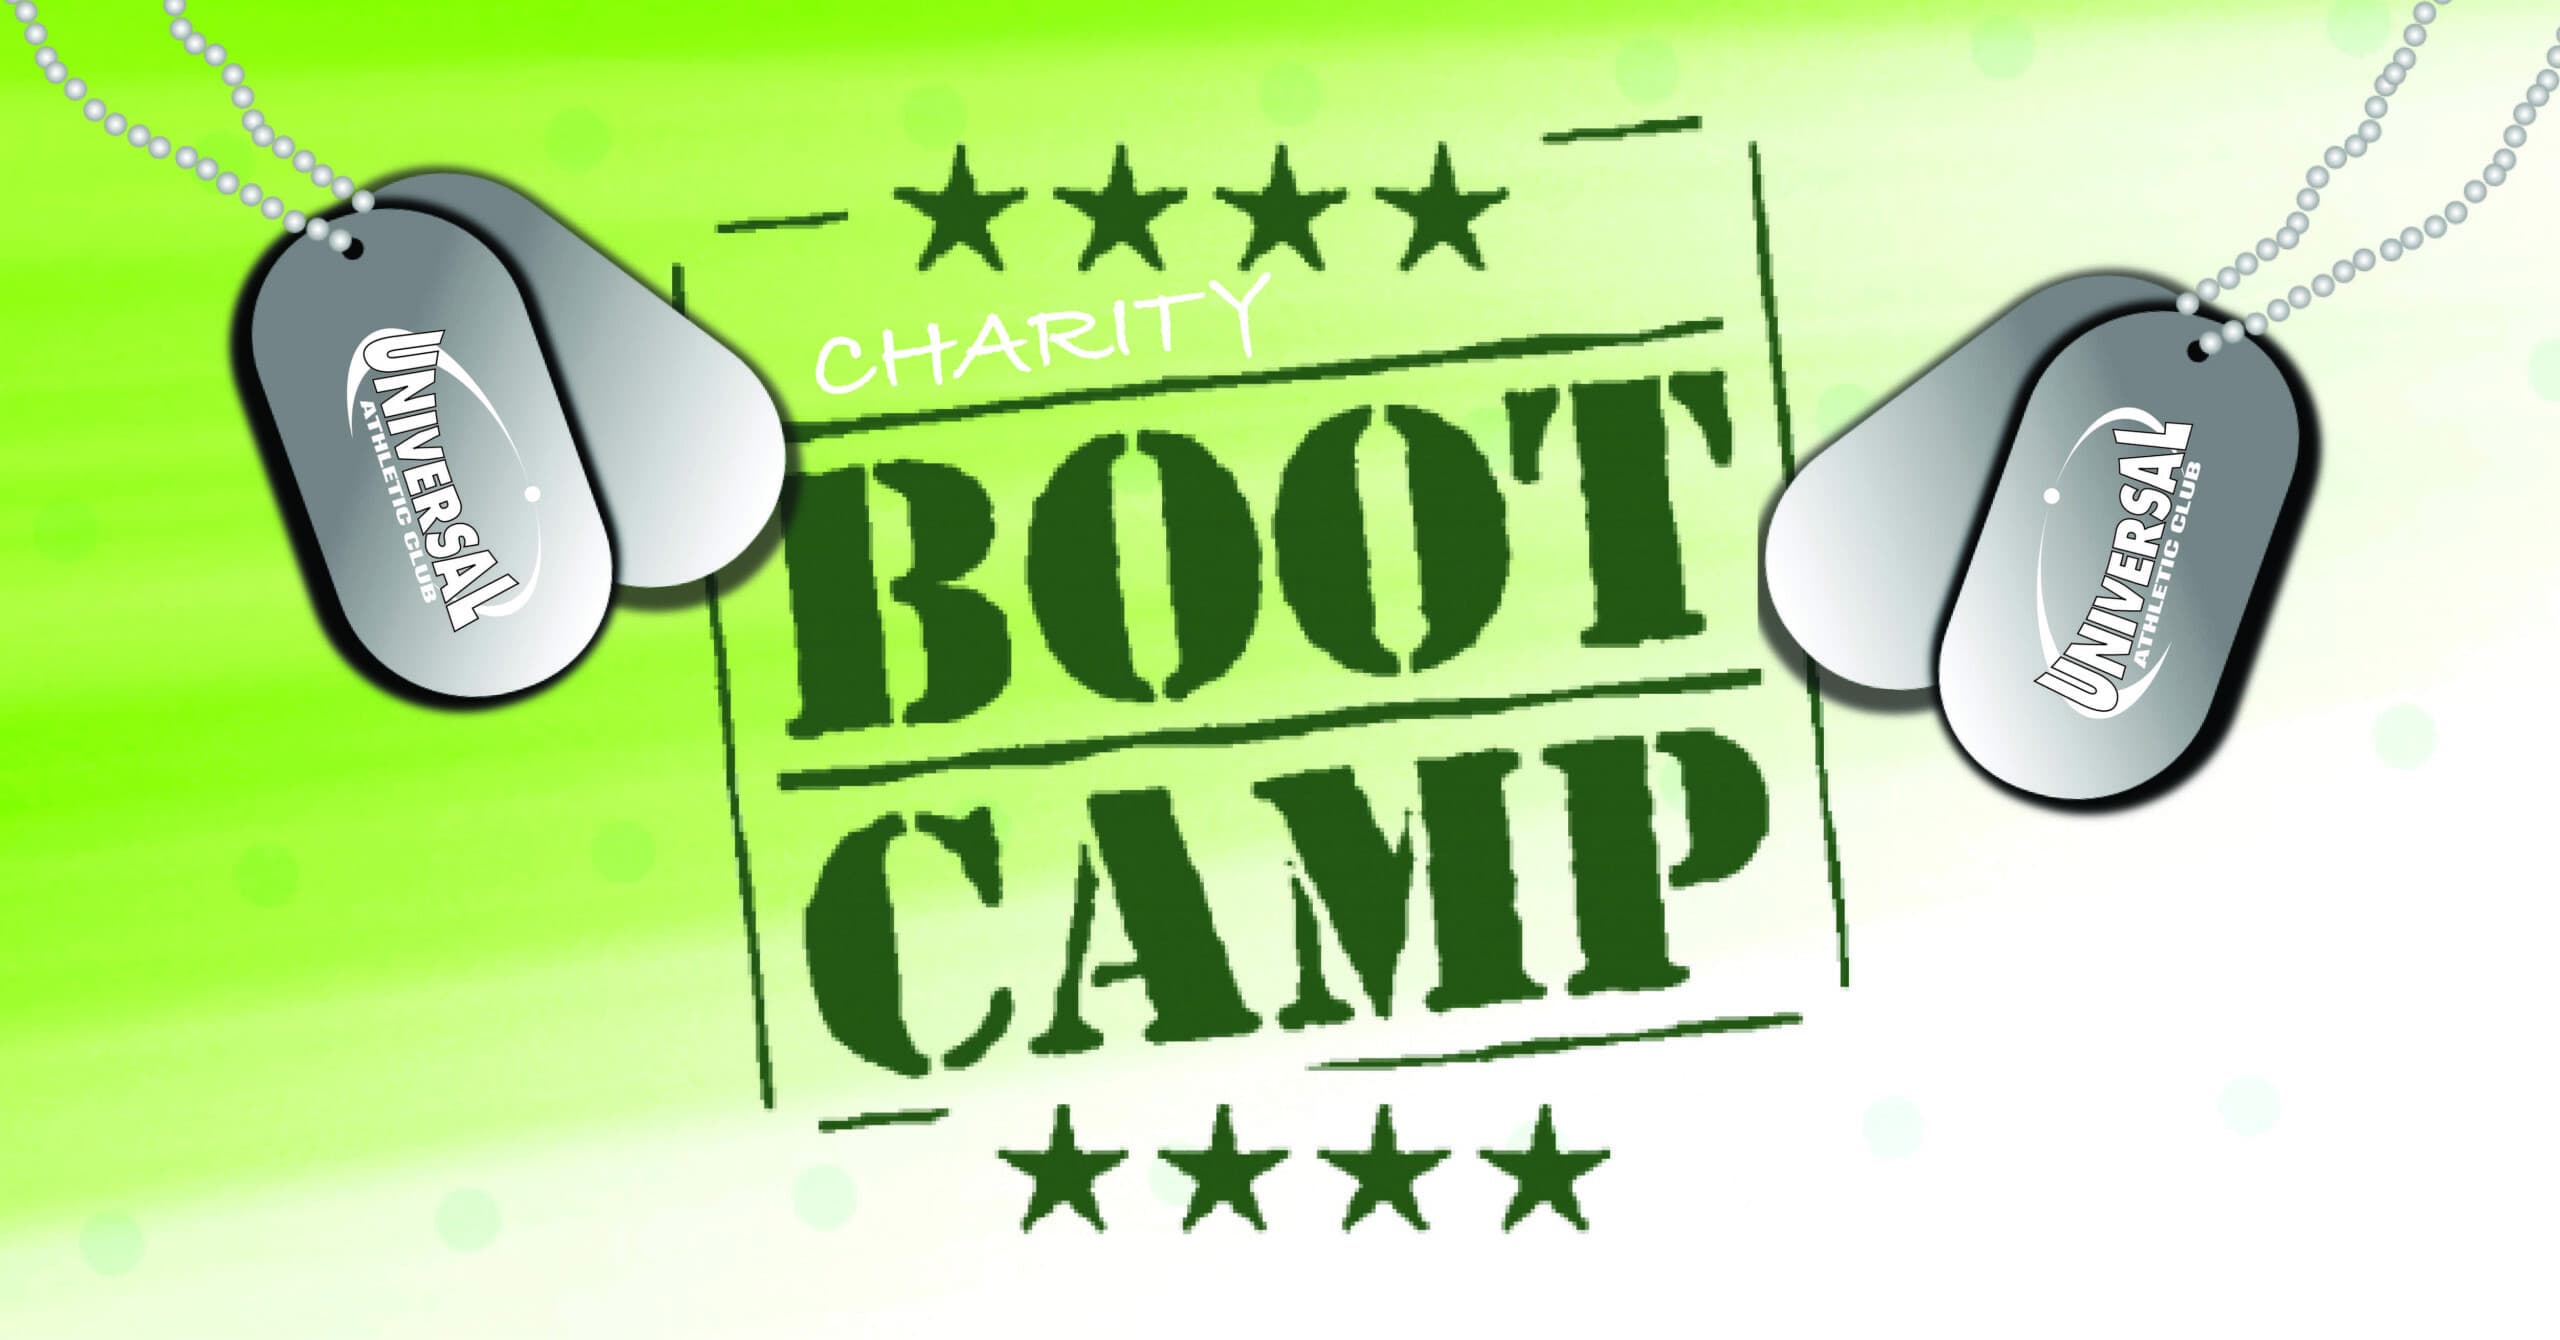 boot camp for charity